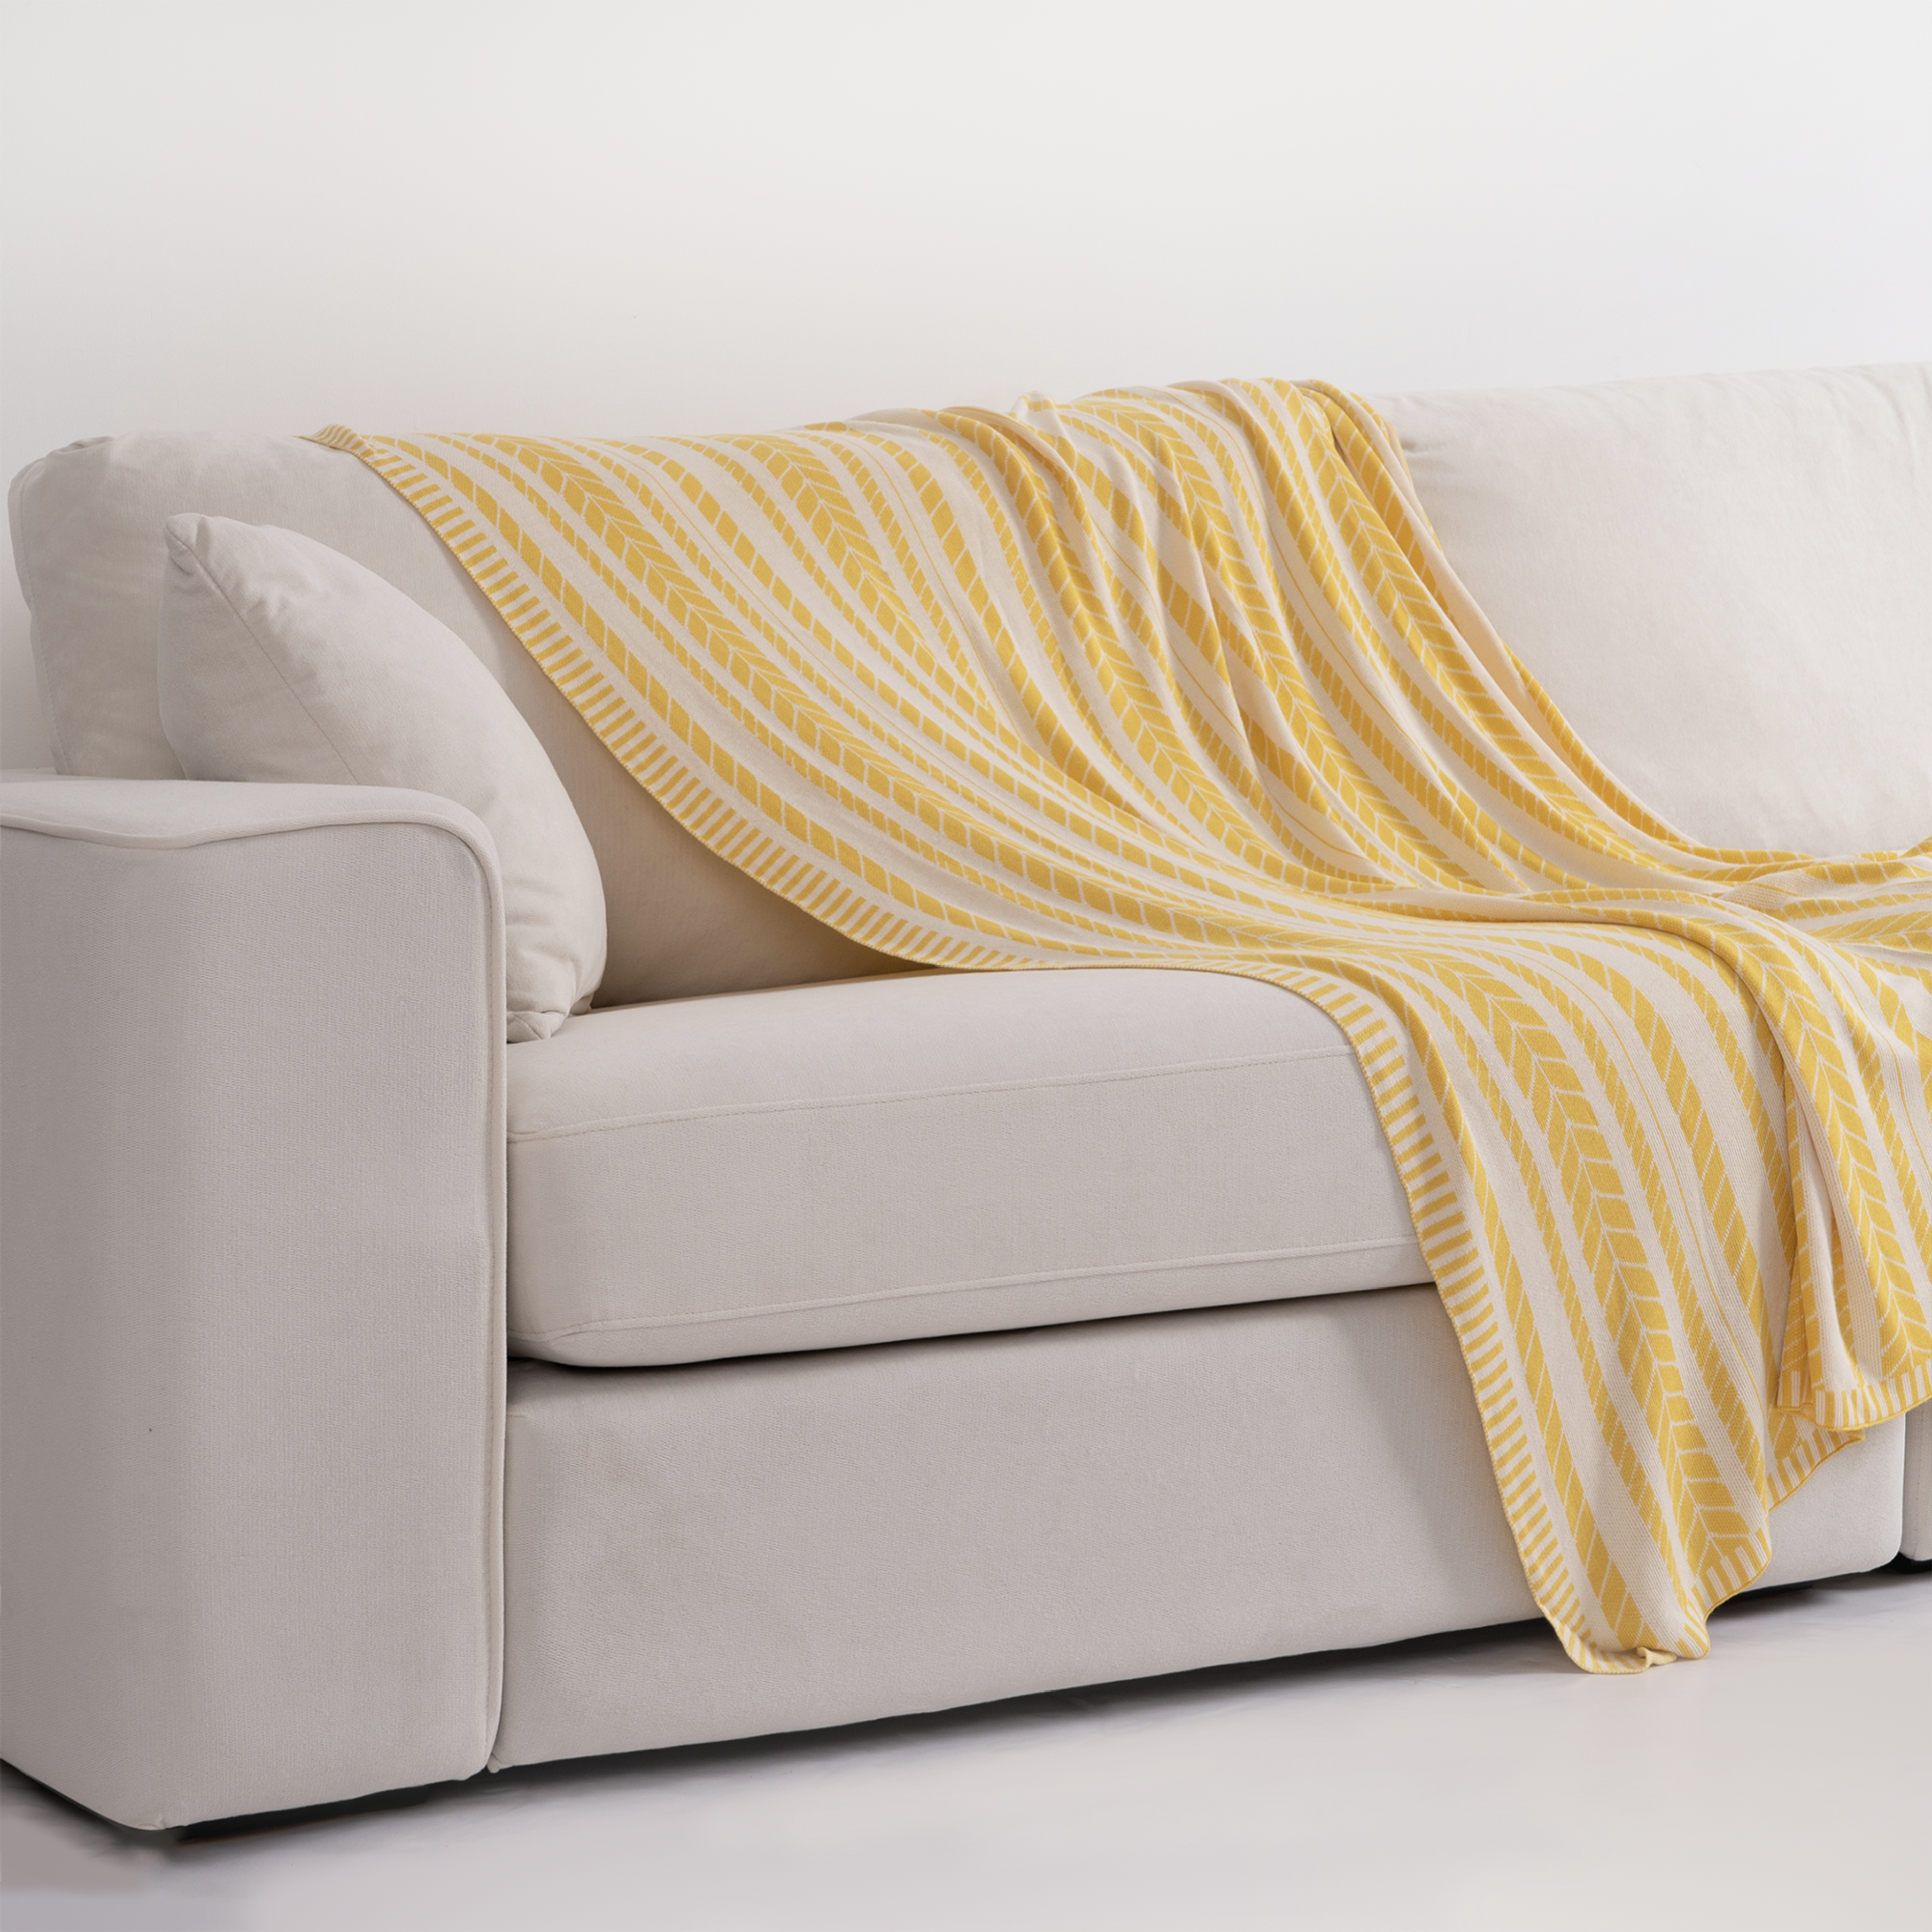 Double-Layered Striped Throw